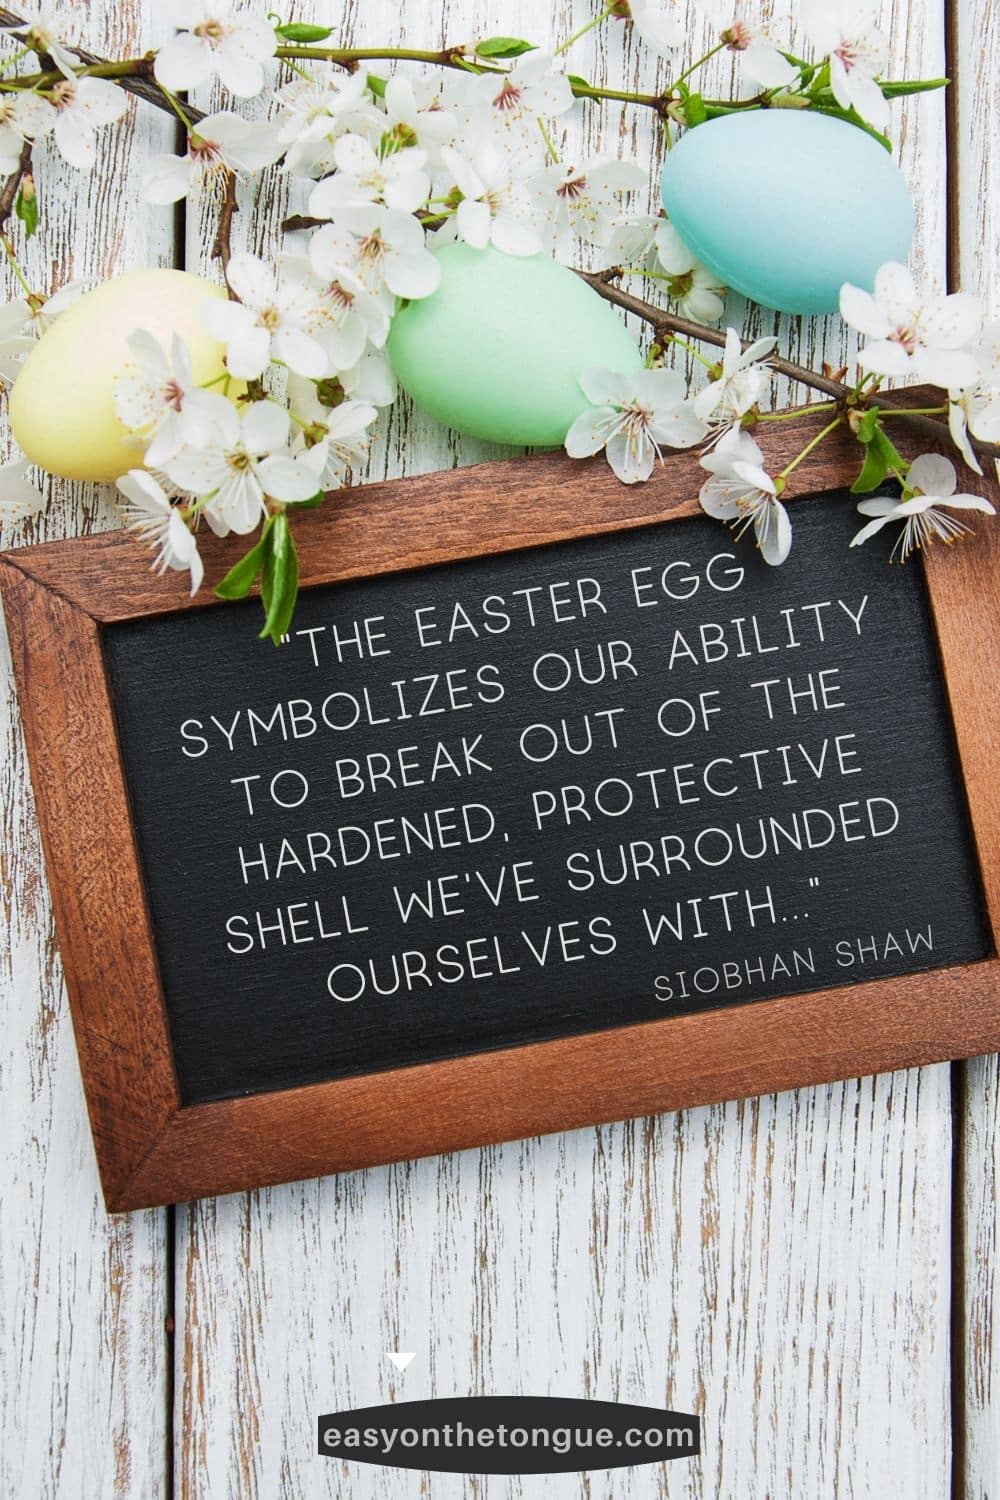 The Easter Egg symbolizes Best Easter Quotes Best Easter Quotes, Wishes and Messages to Share